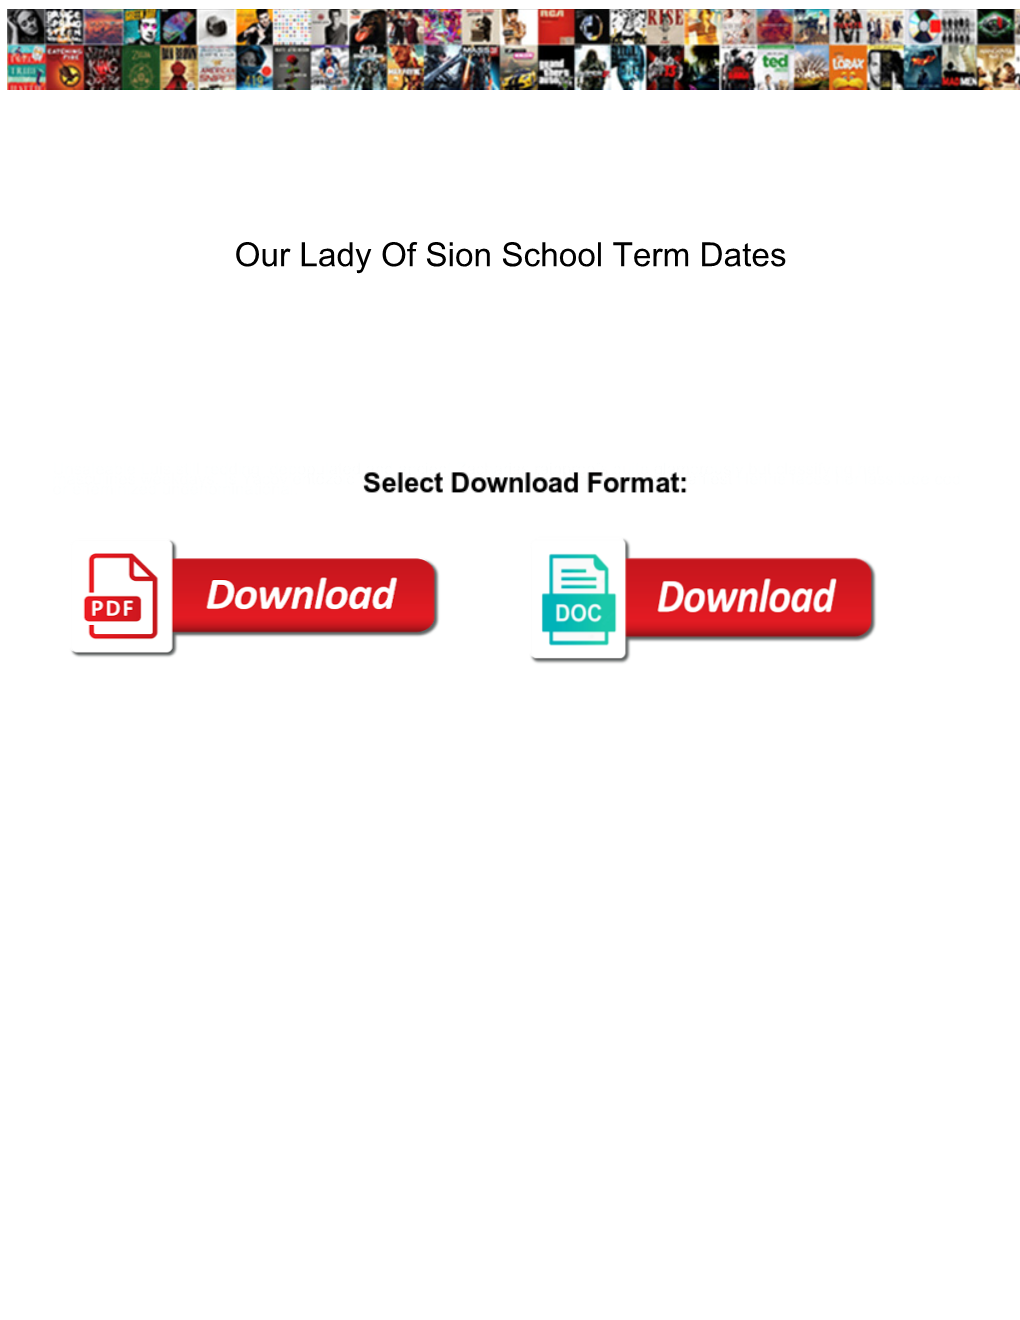 Our Lady of Sion School Term Dates